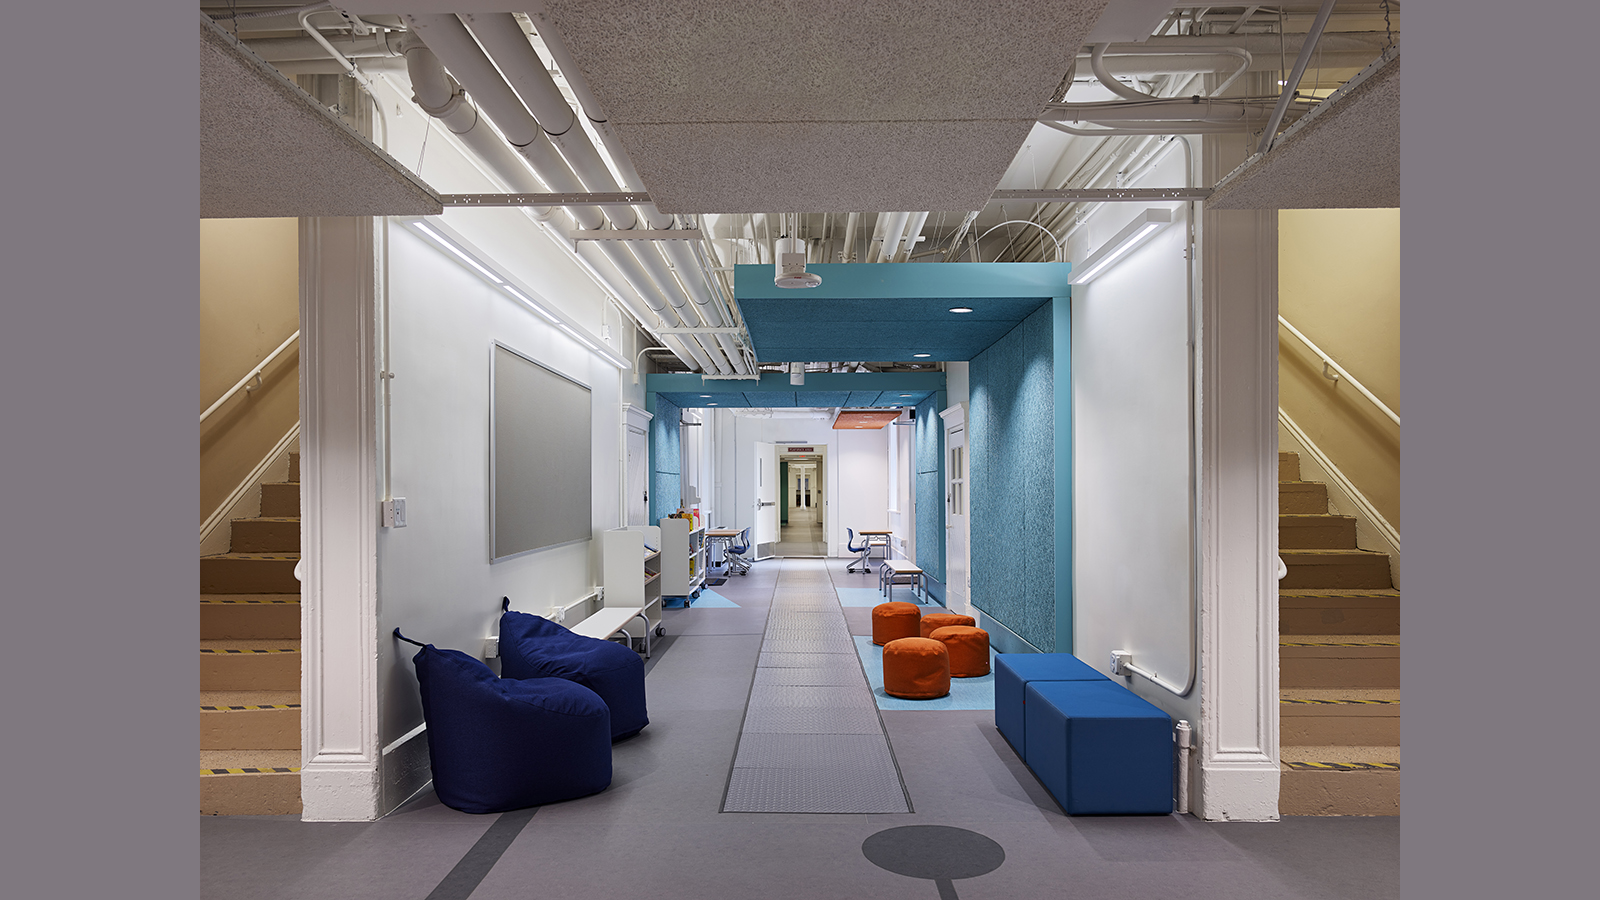 Creative Minds International Interior, a hallway with seating, tow stairwells on either side